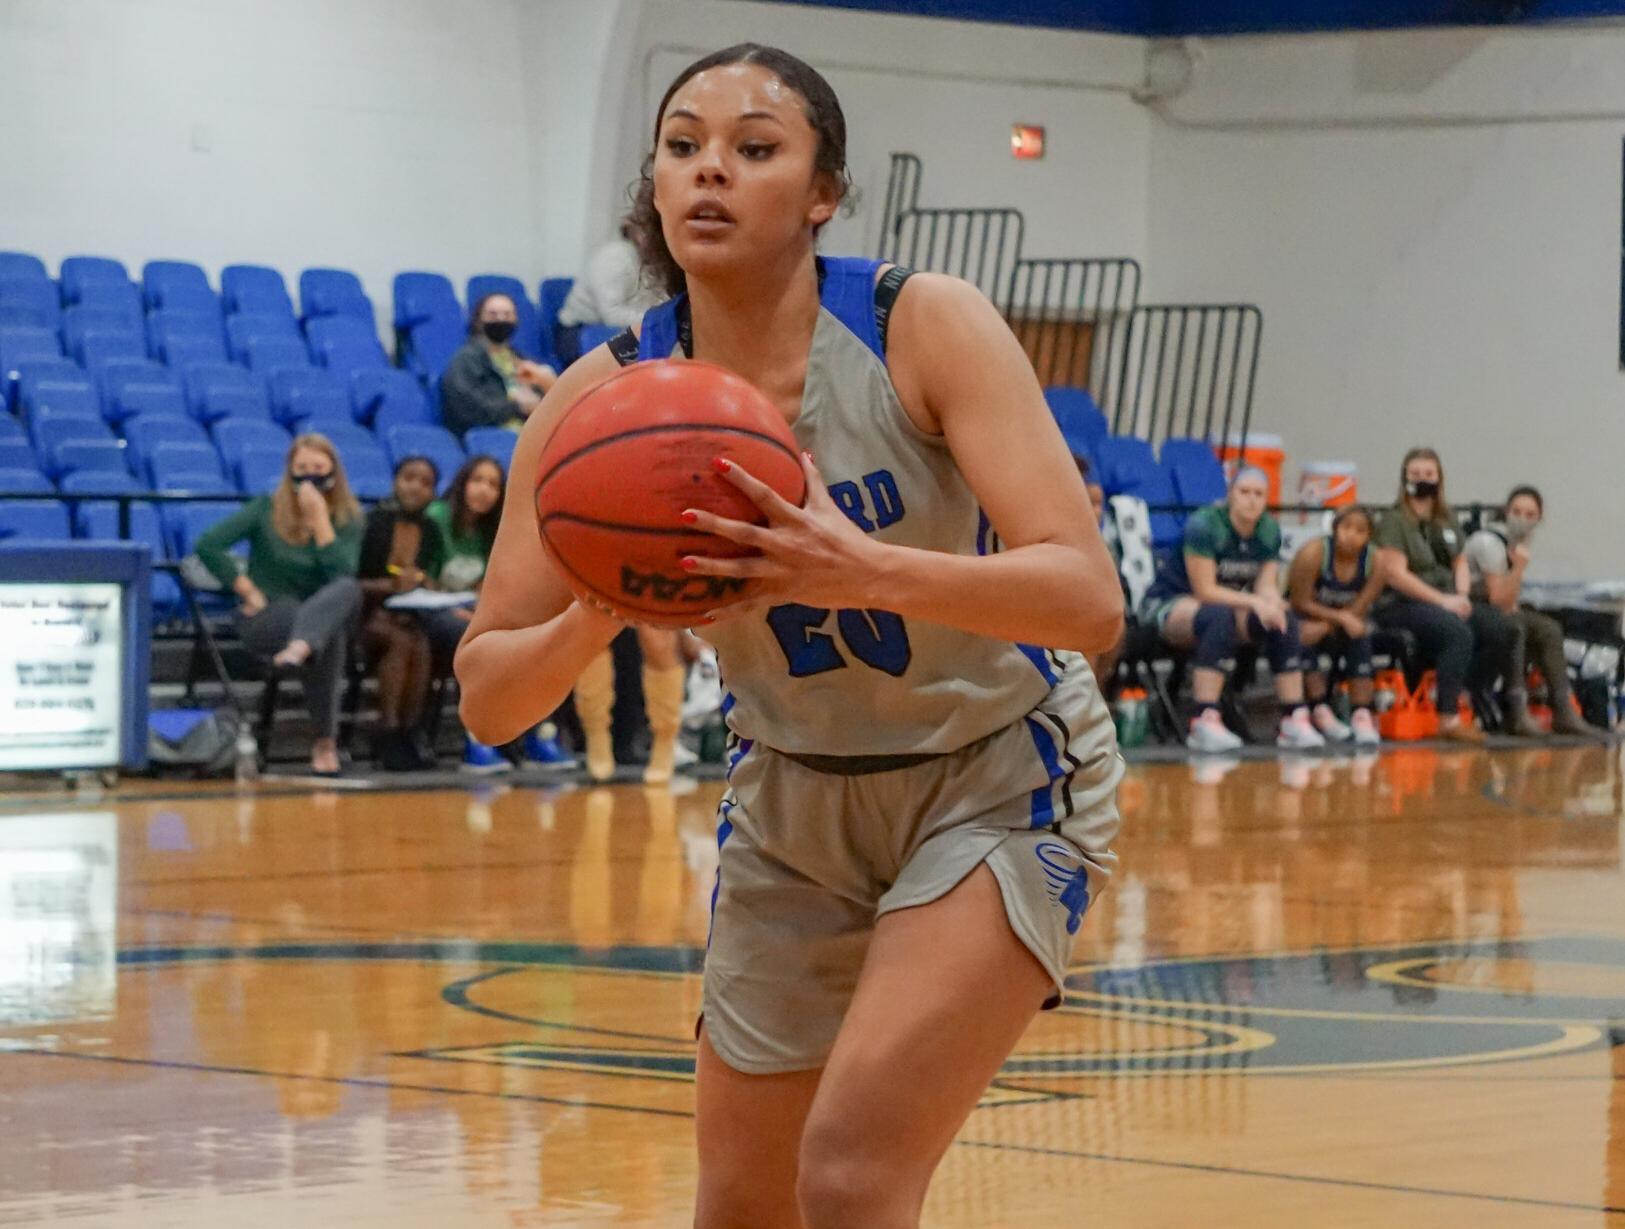 Aysha Short tallied a career-high 23 points to lead Brevard College to its third conference win of the season (Photo courtesy of Damon Hewitt '23).